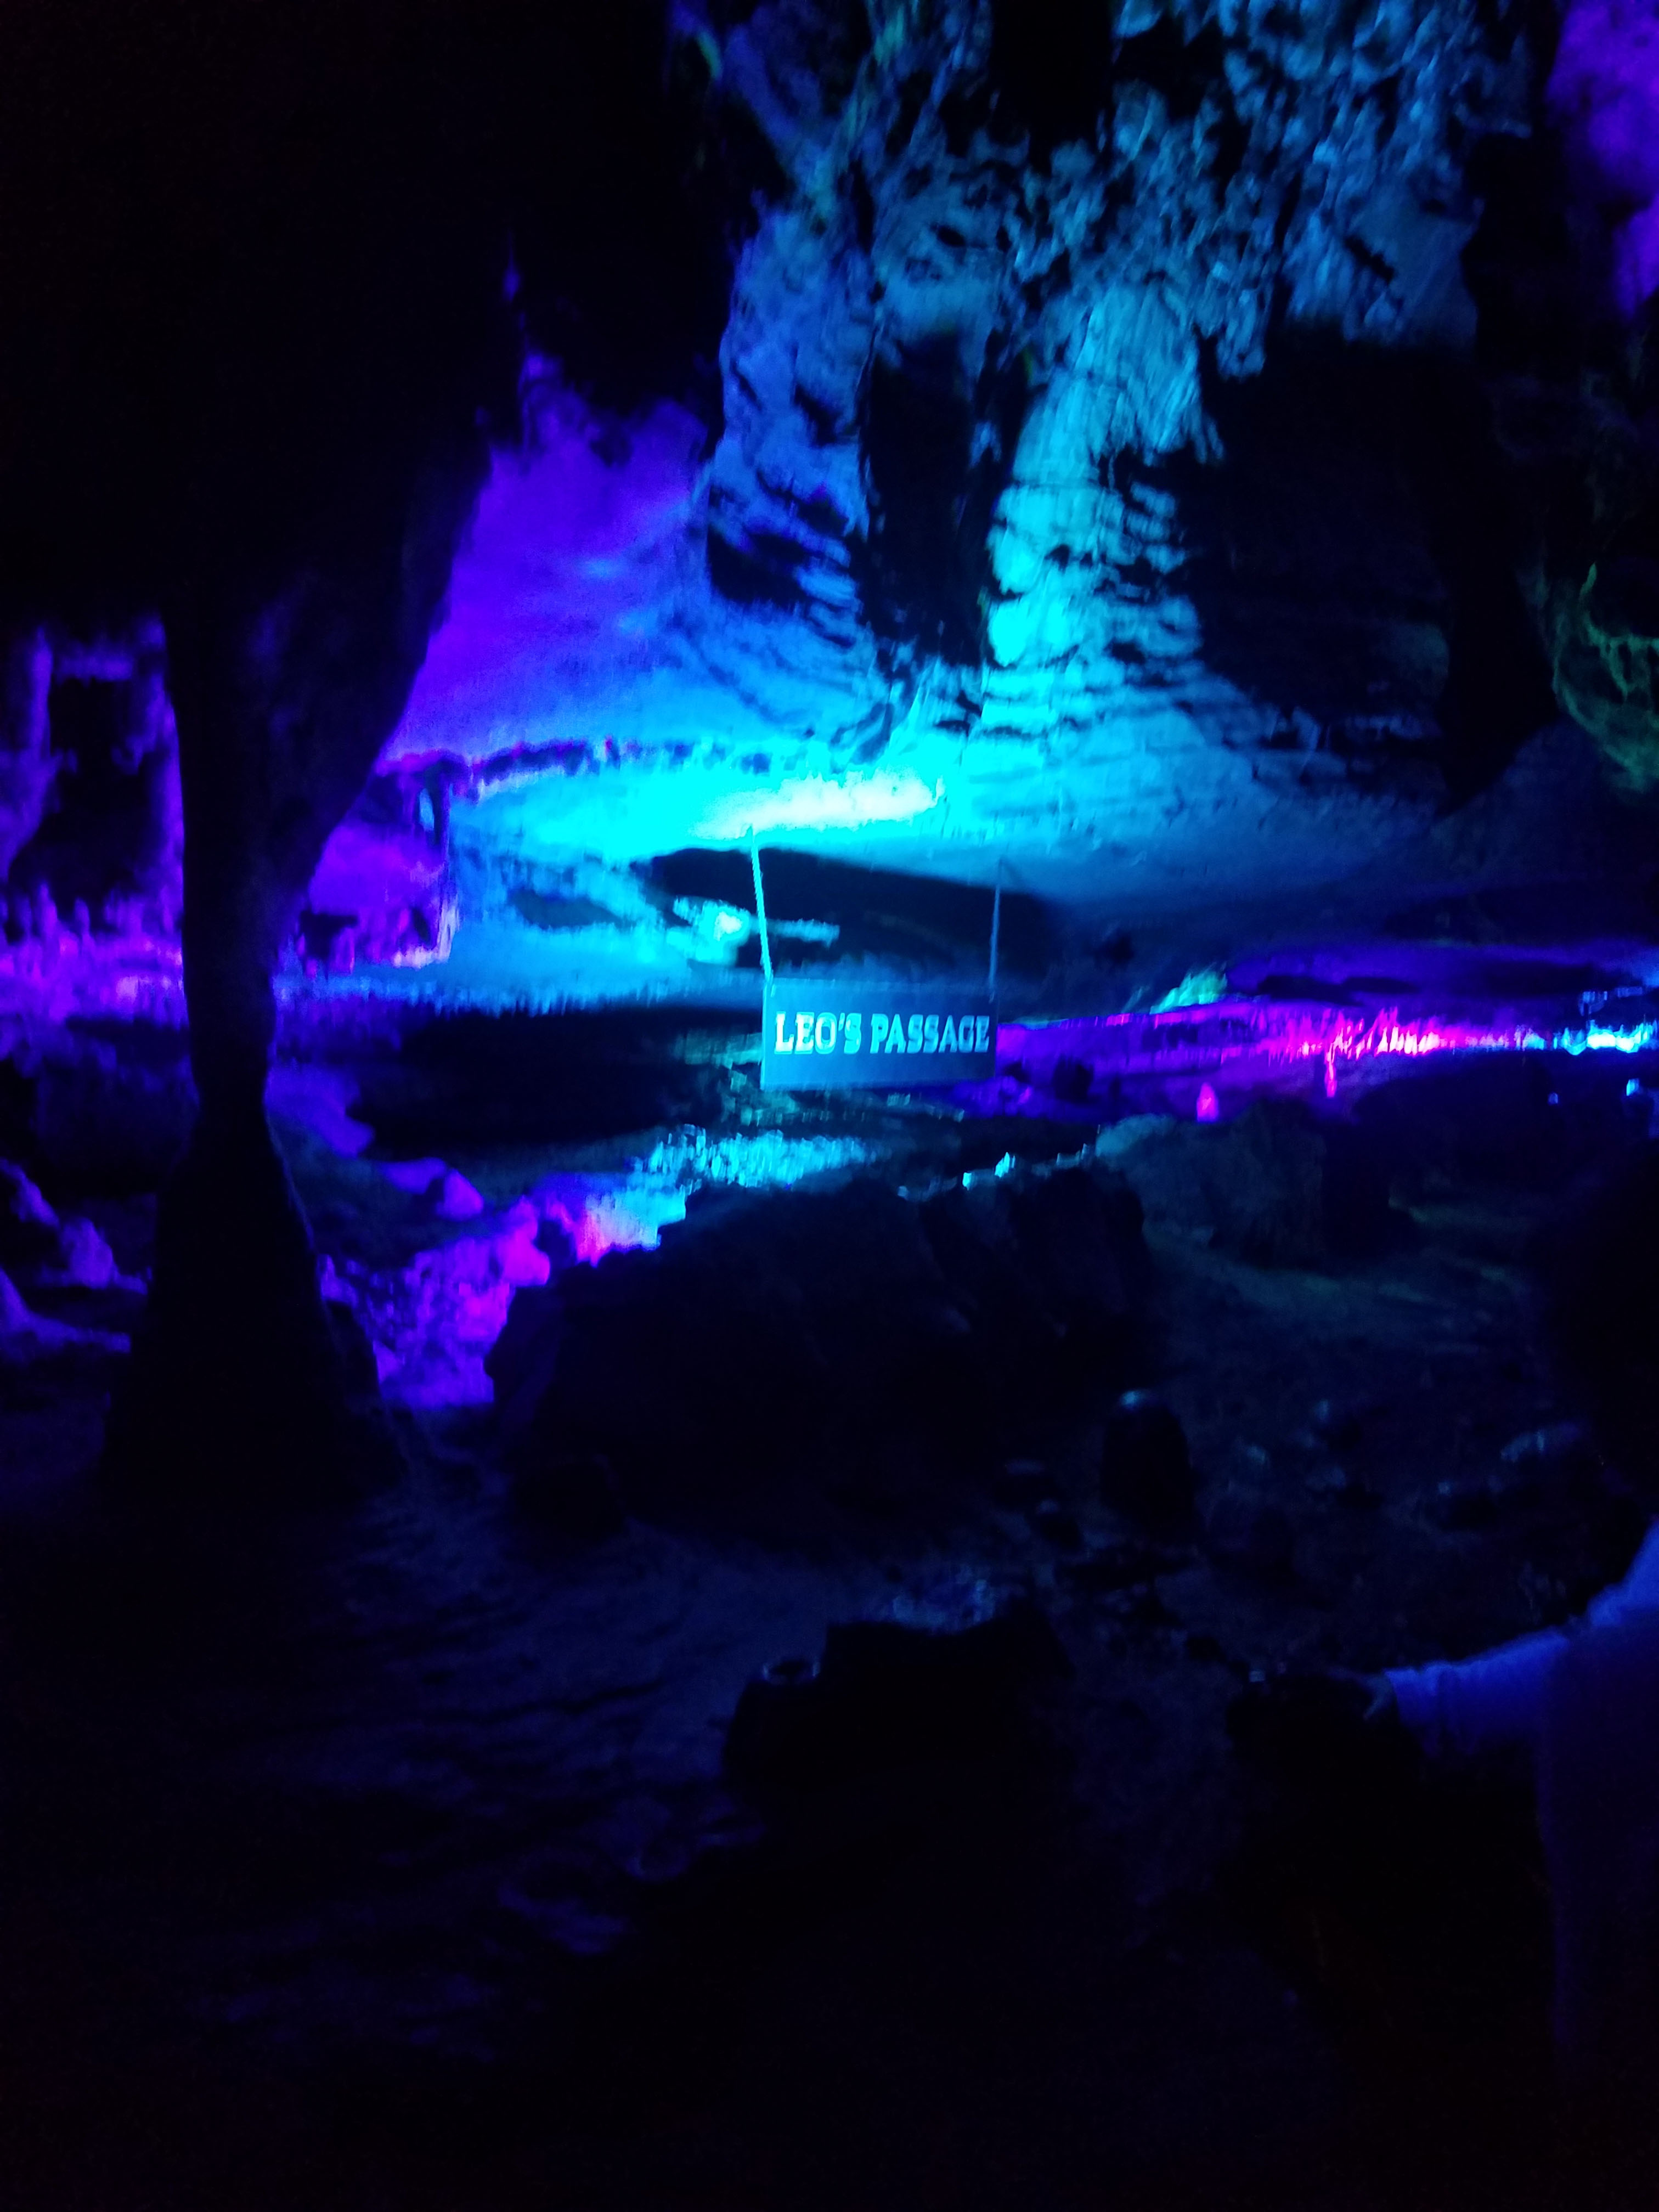 Ruby Falls Guide Leo's Passage